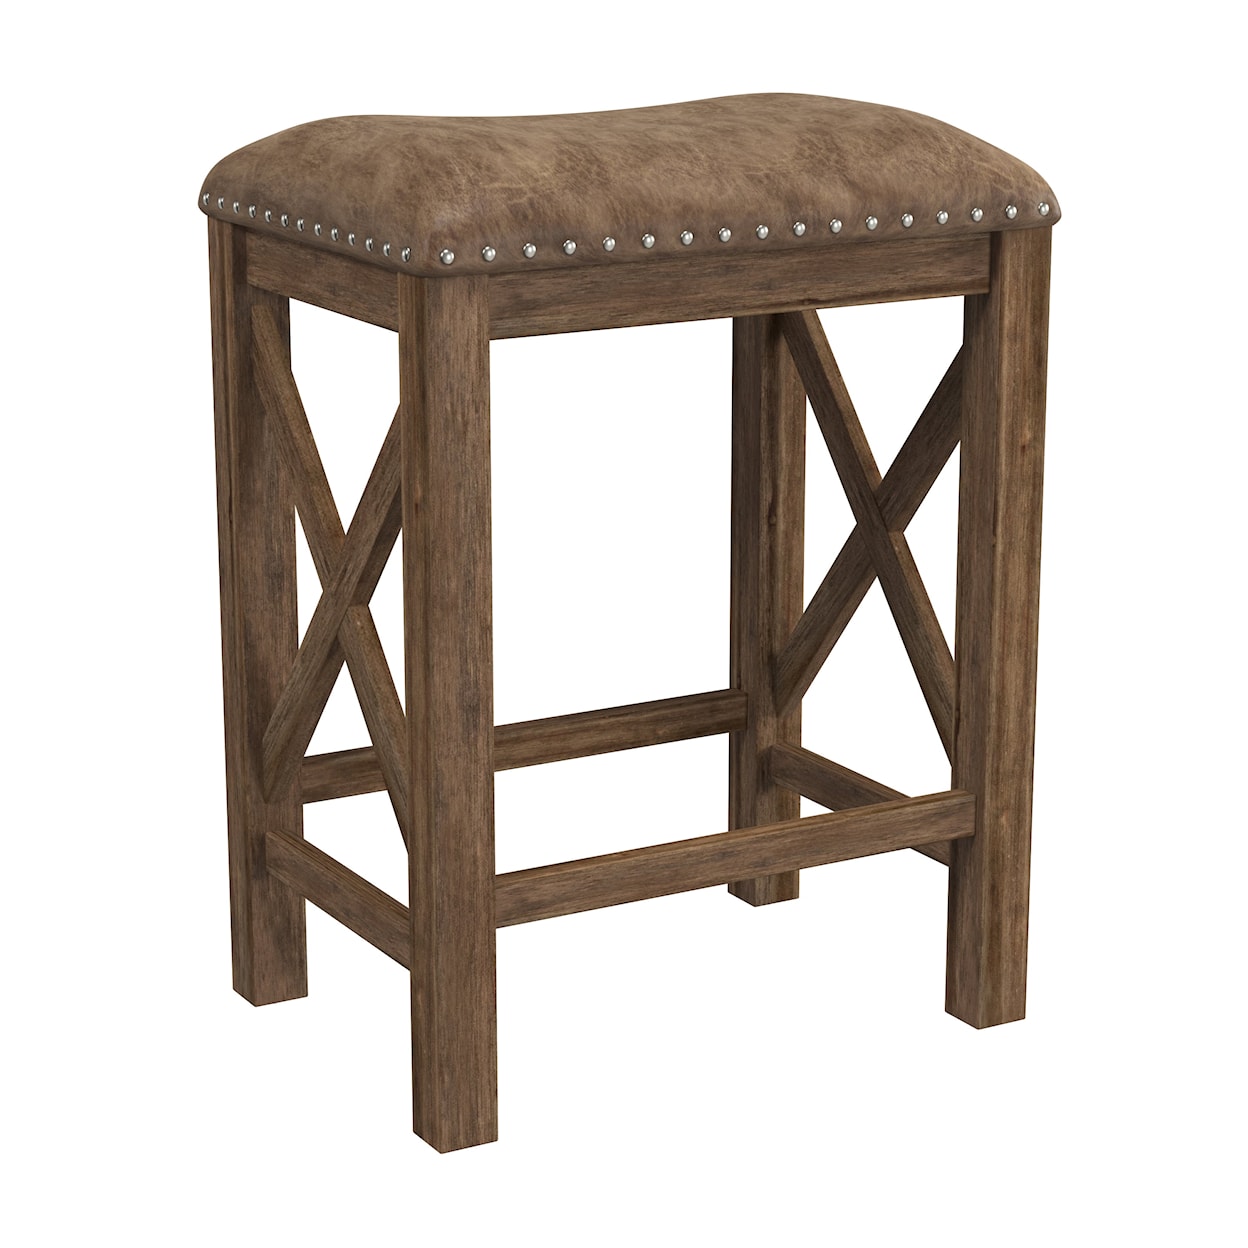 Hillsdale Willow Bend Counter Stool